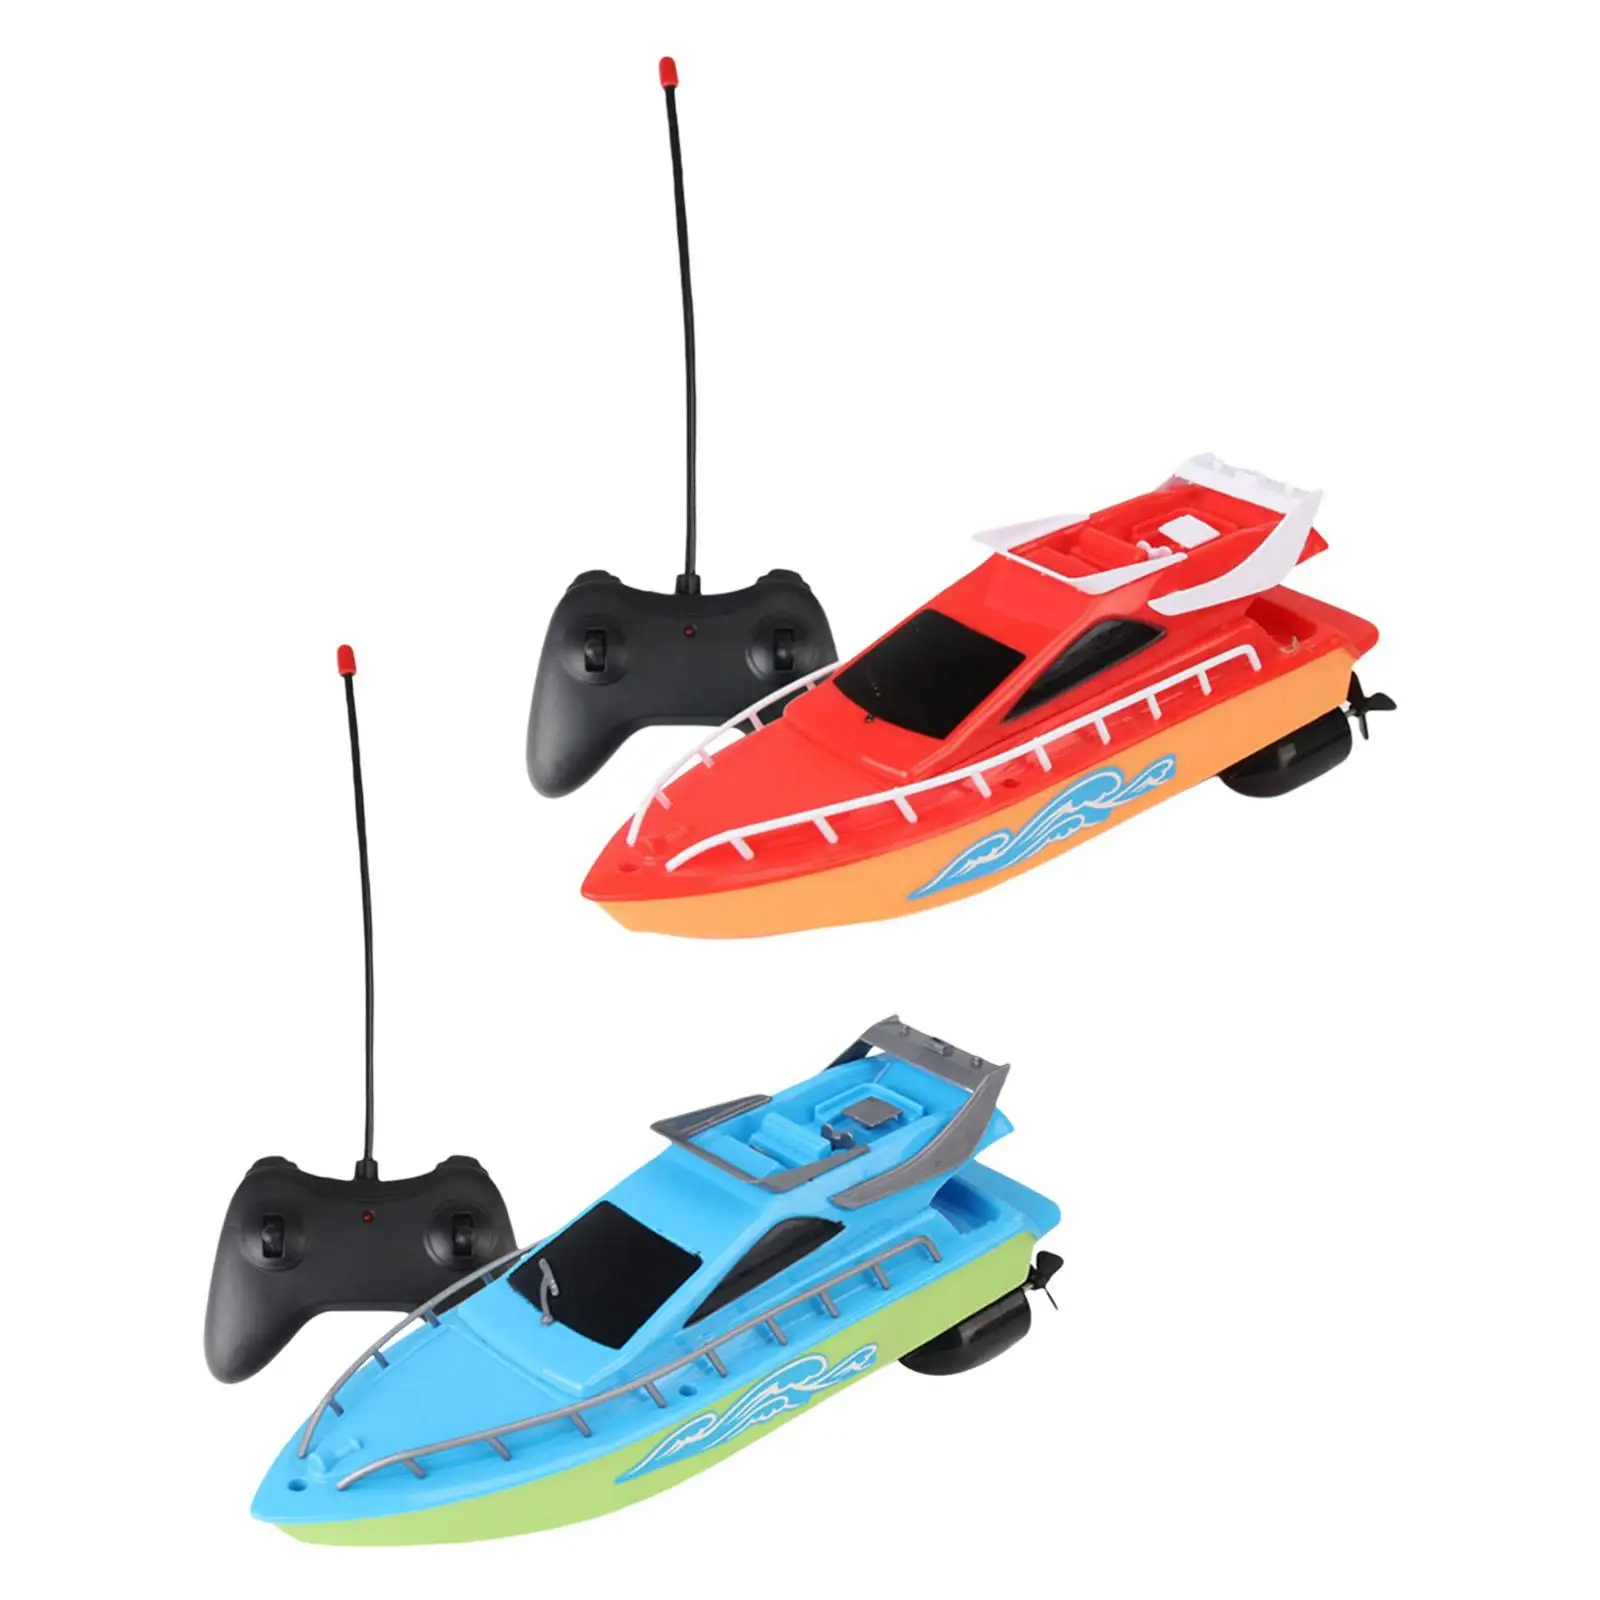 Wireless RC Racing Boat Ship Toy Electric Plastic for Kids Adult Children